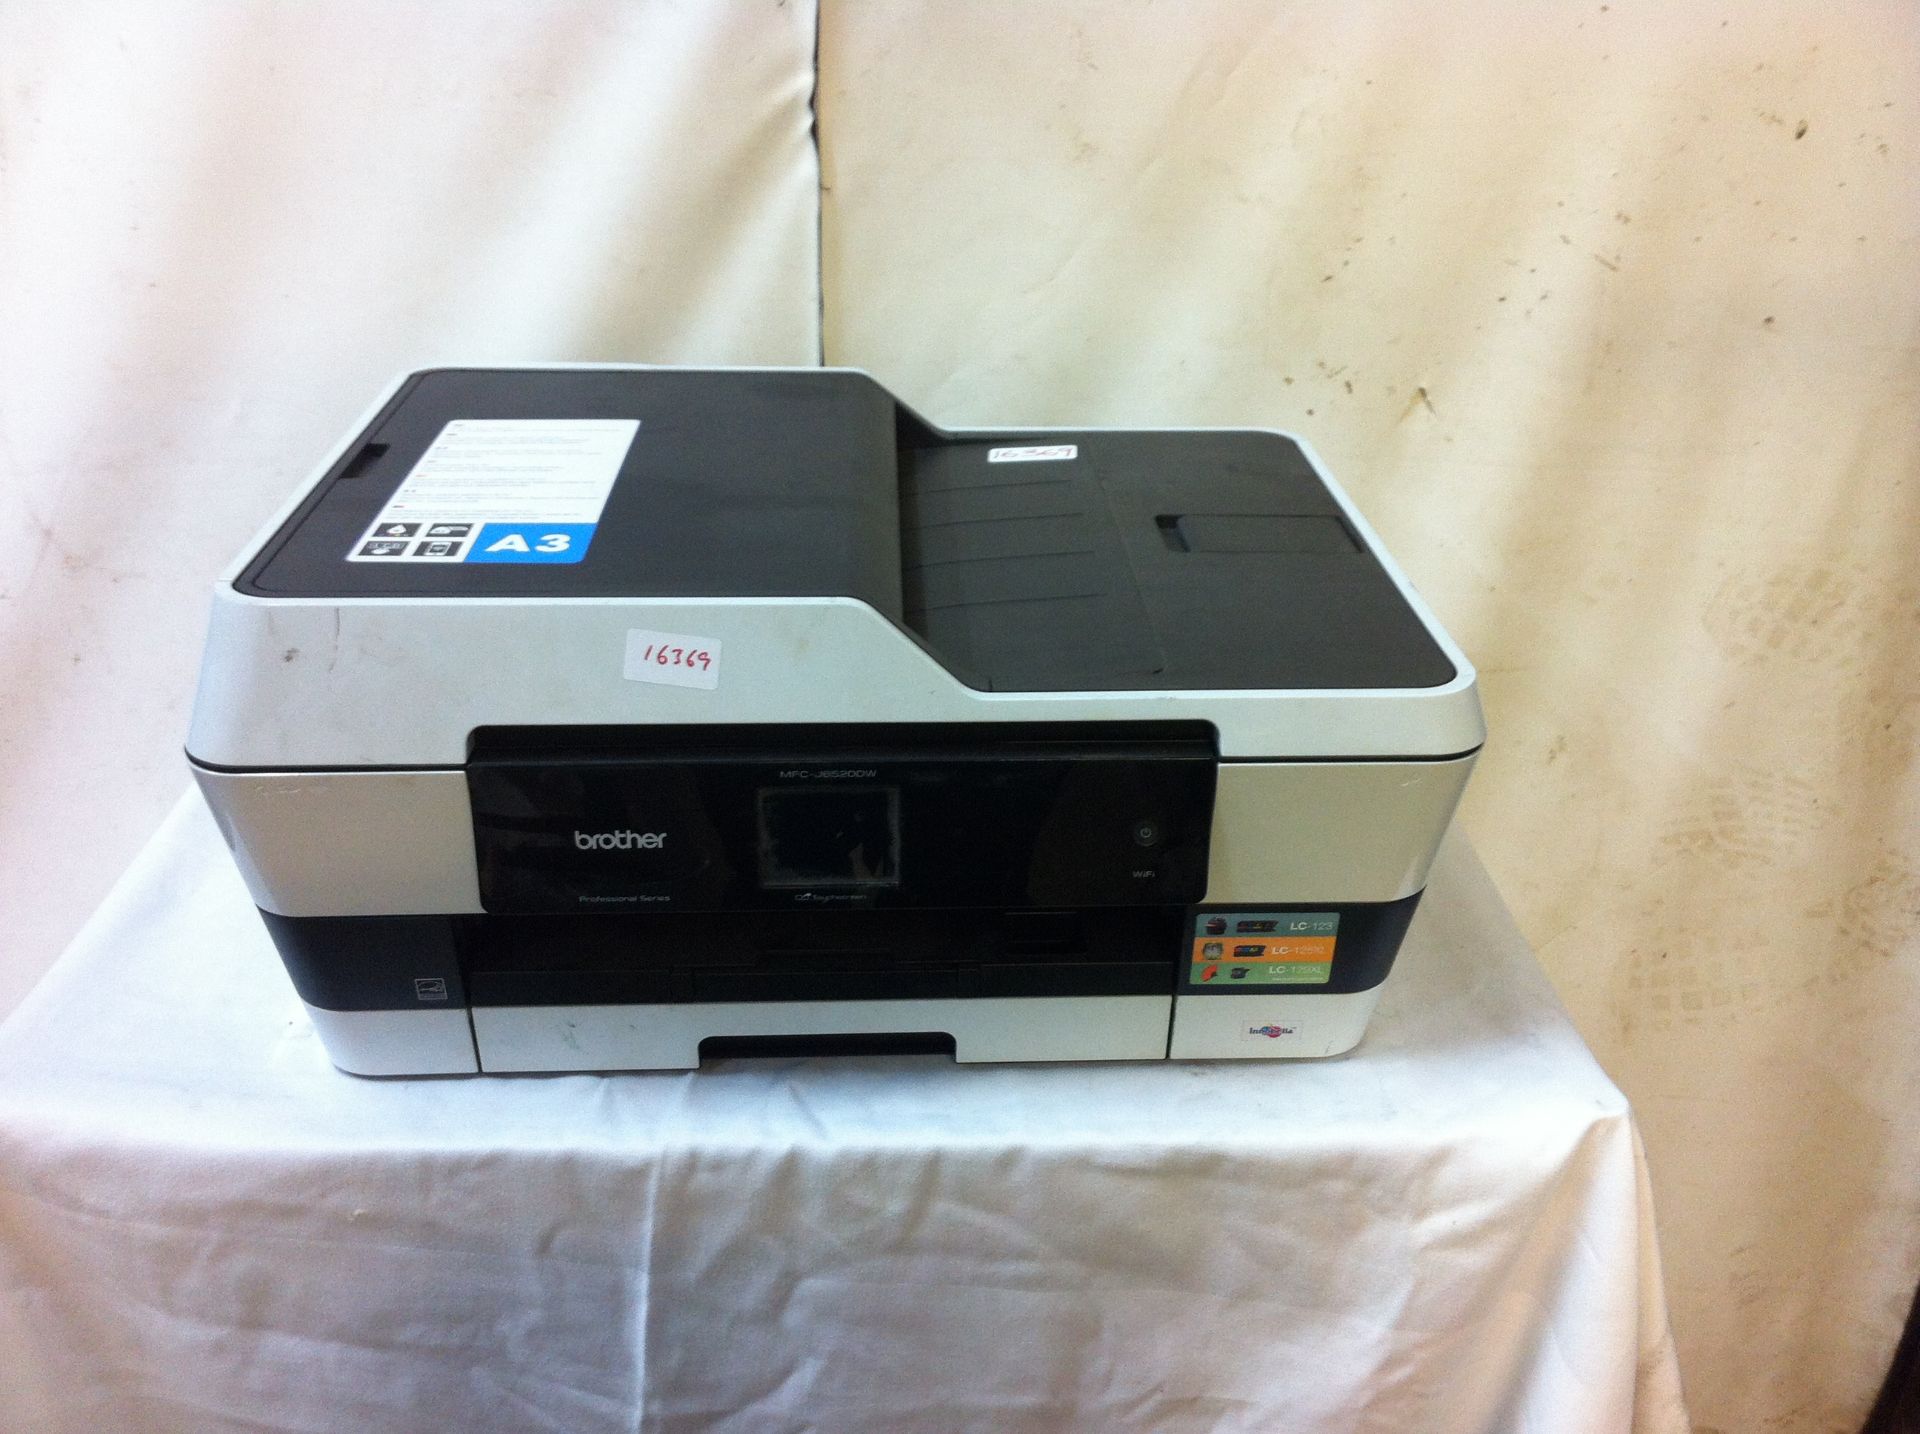 2 Printers, Brother Professional Series MFC-J6520DW Scanner/Copier/Printer and Epson WF-7015 Printer - Image 2 of 3